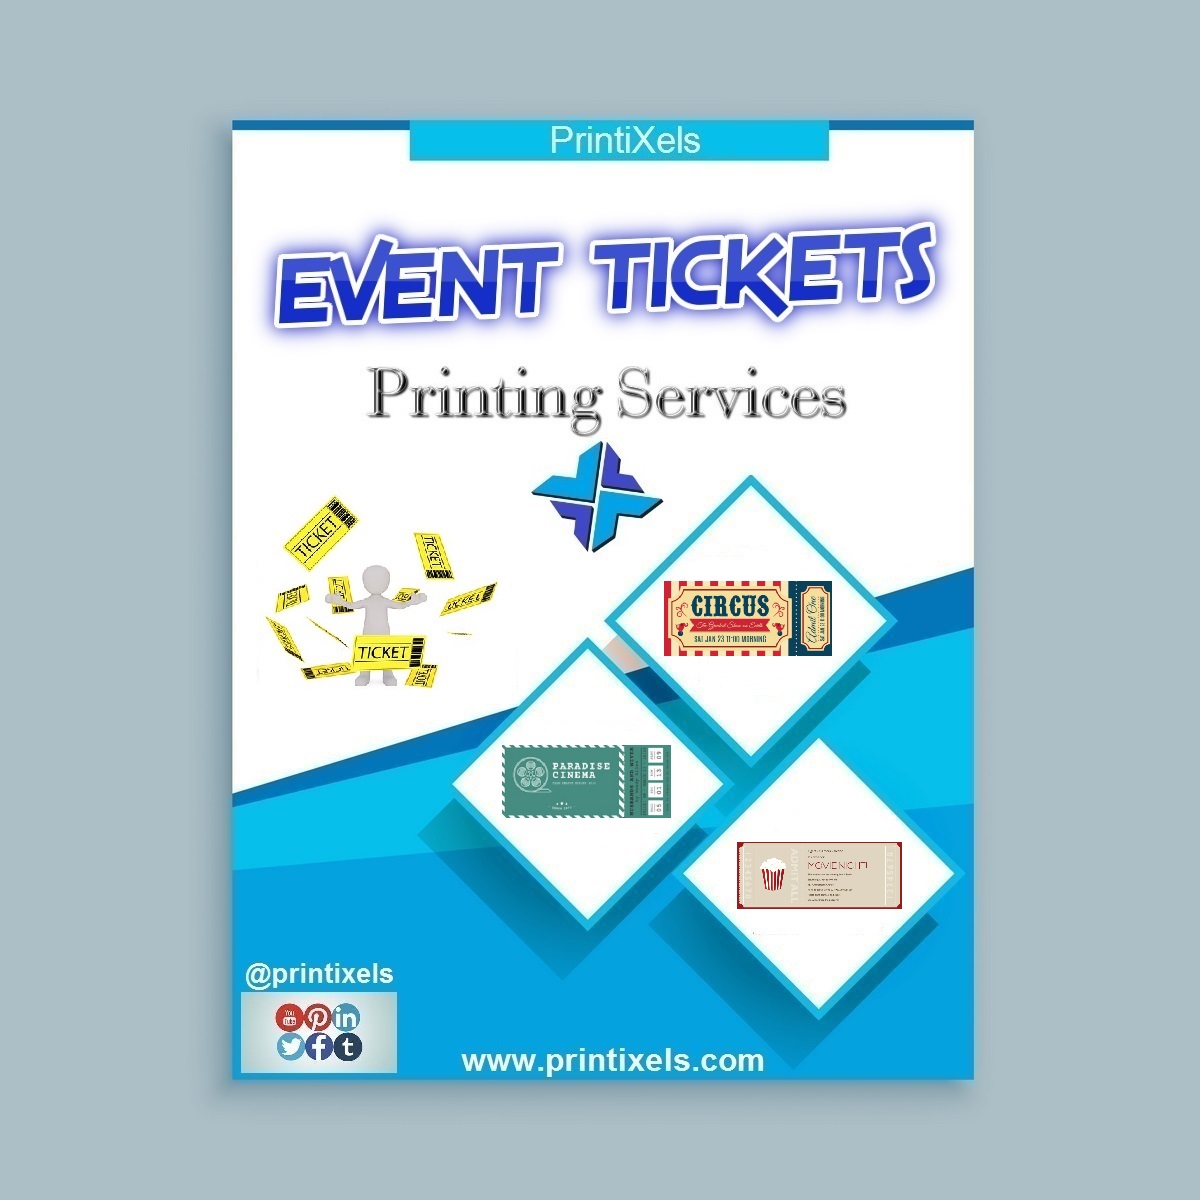 Event Tickets Printing Services